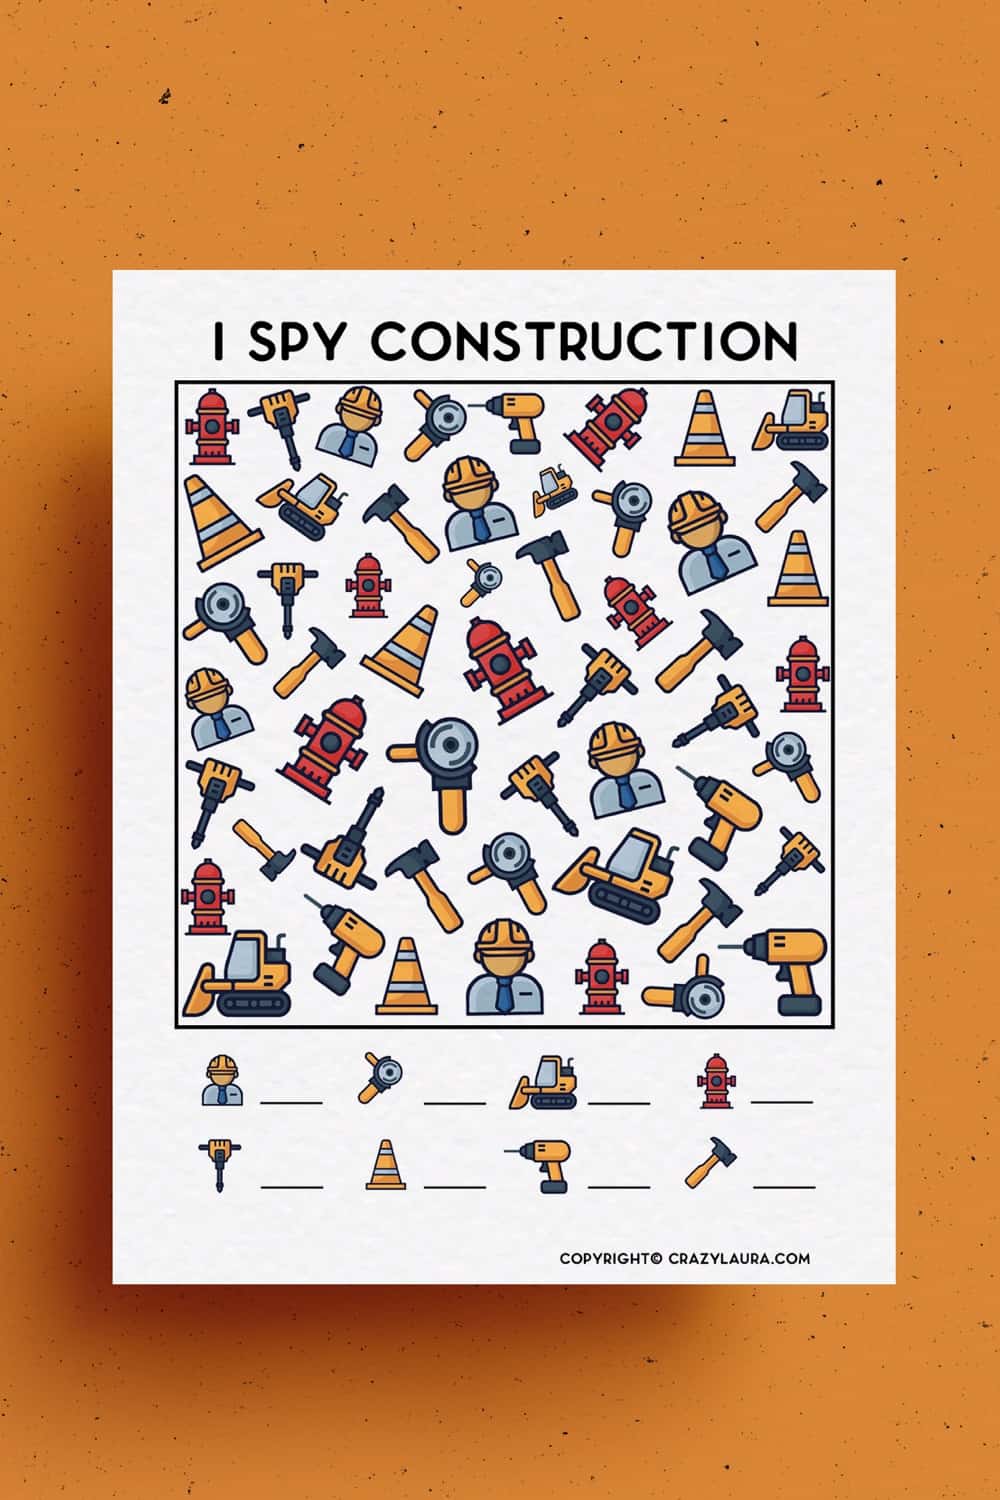 i spy downloadable game for young kids